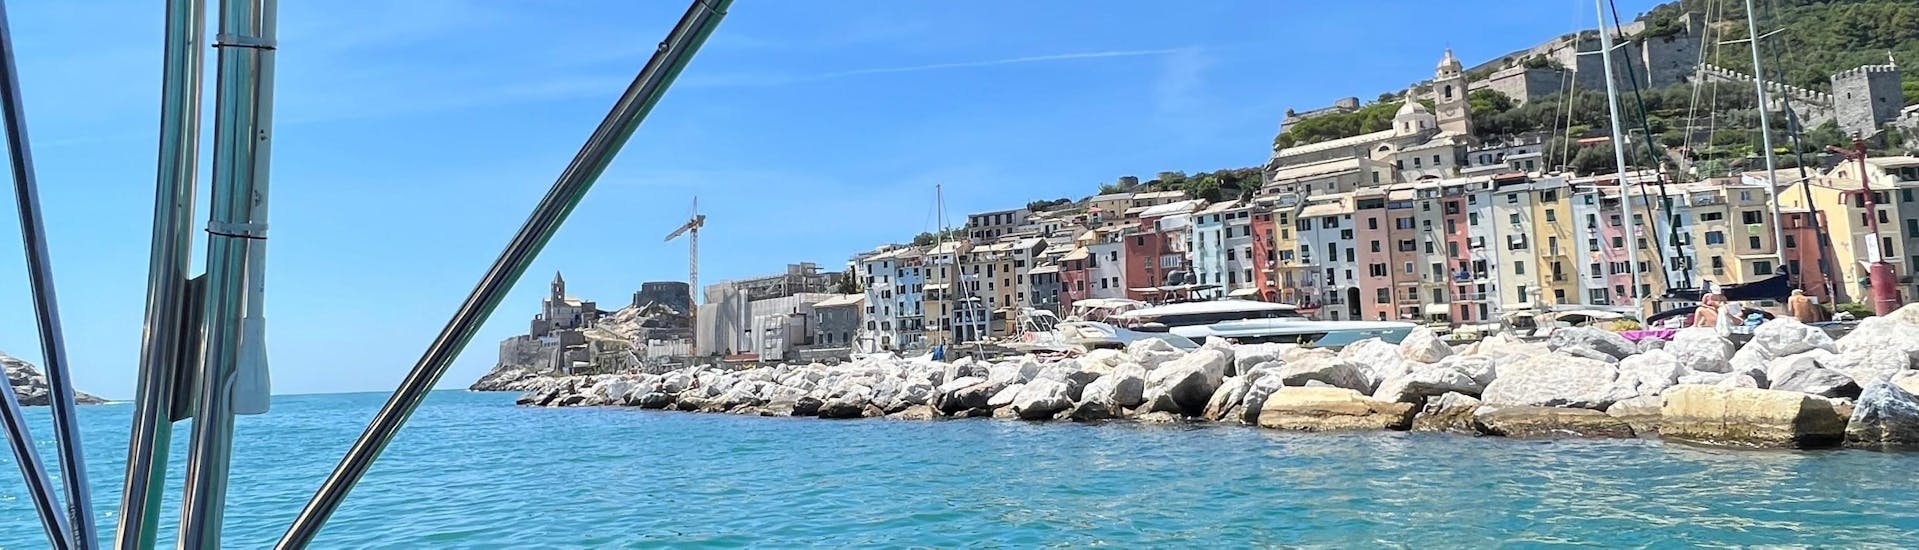 The view of the Ligurian coastline you can admire with a boat trip with Maestrale Boat Tour Cinque Terre.